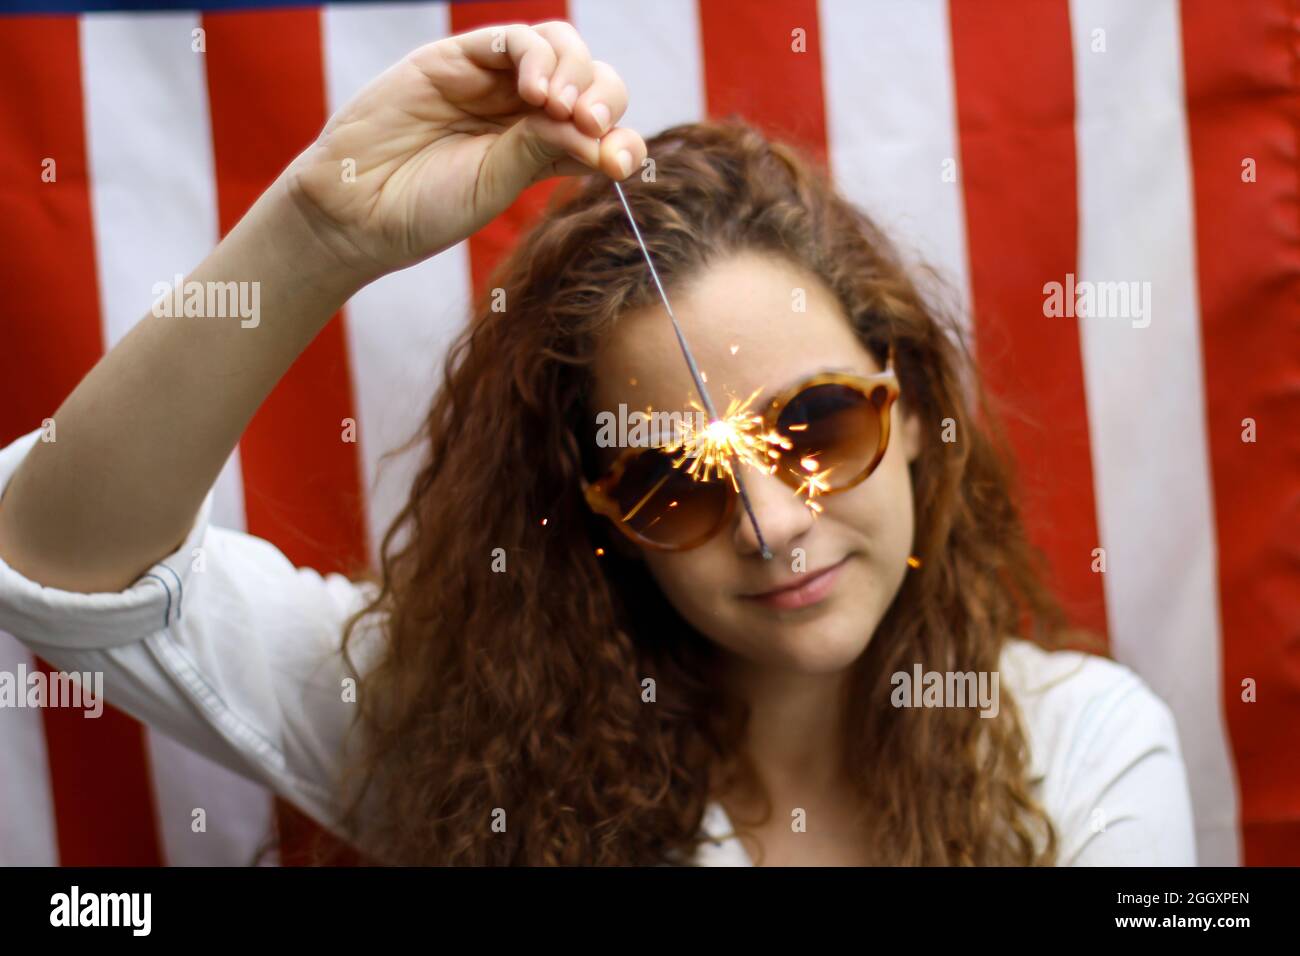 Young redhead Hispanic and Caucasian holding a sparkler in standing in front of the American flag. Stock Photo